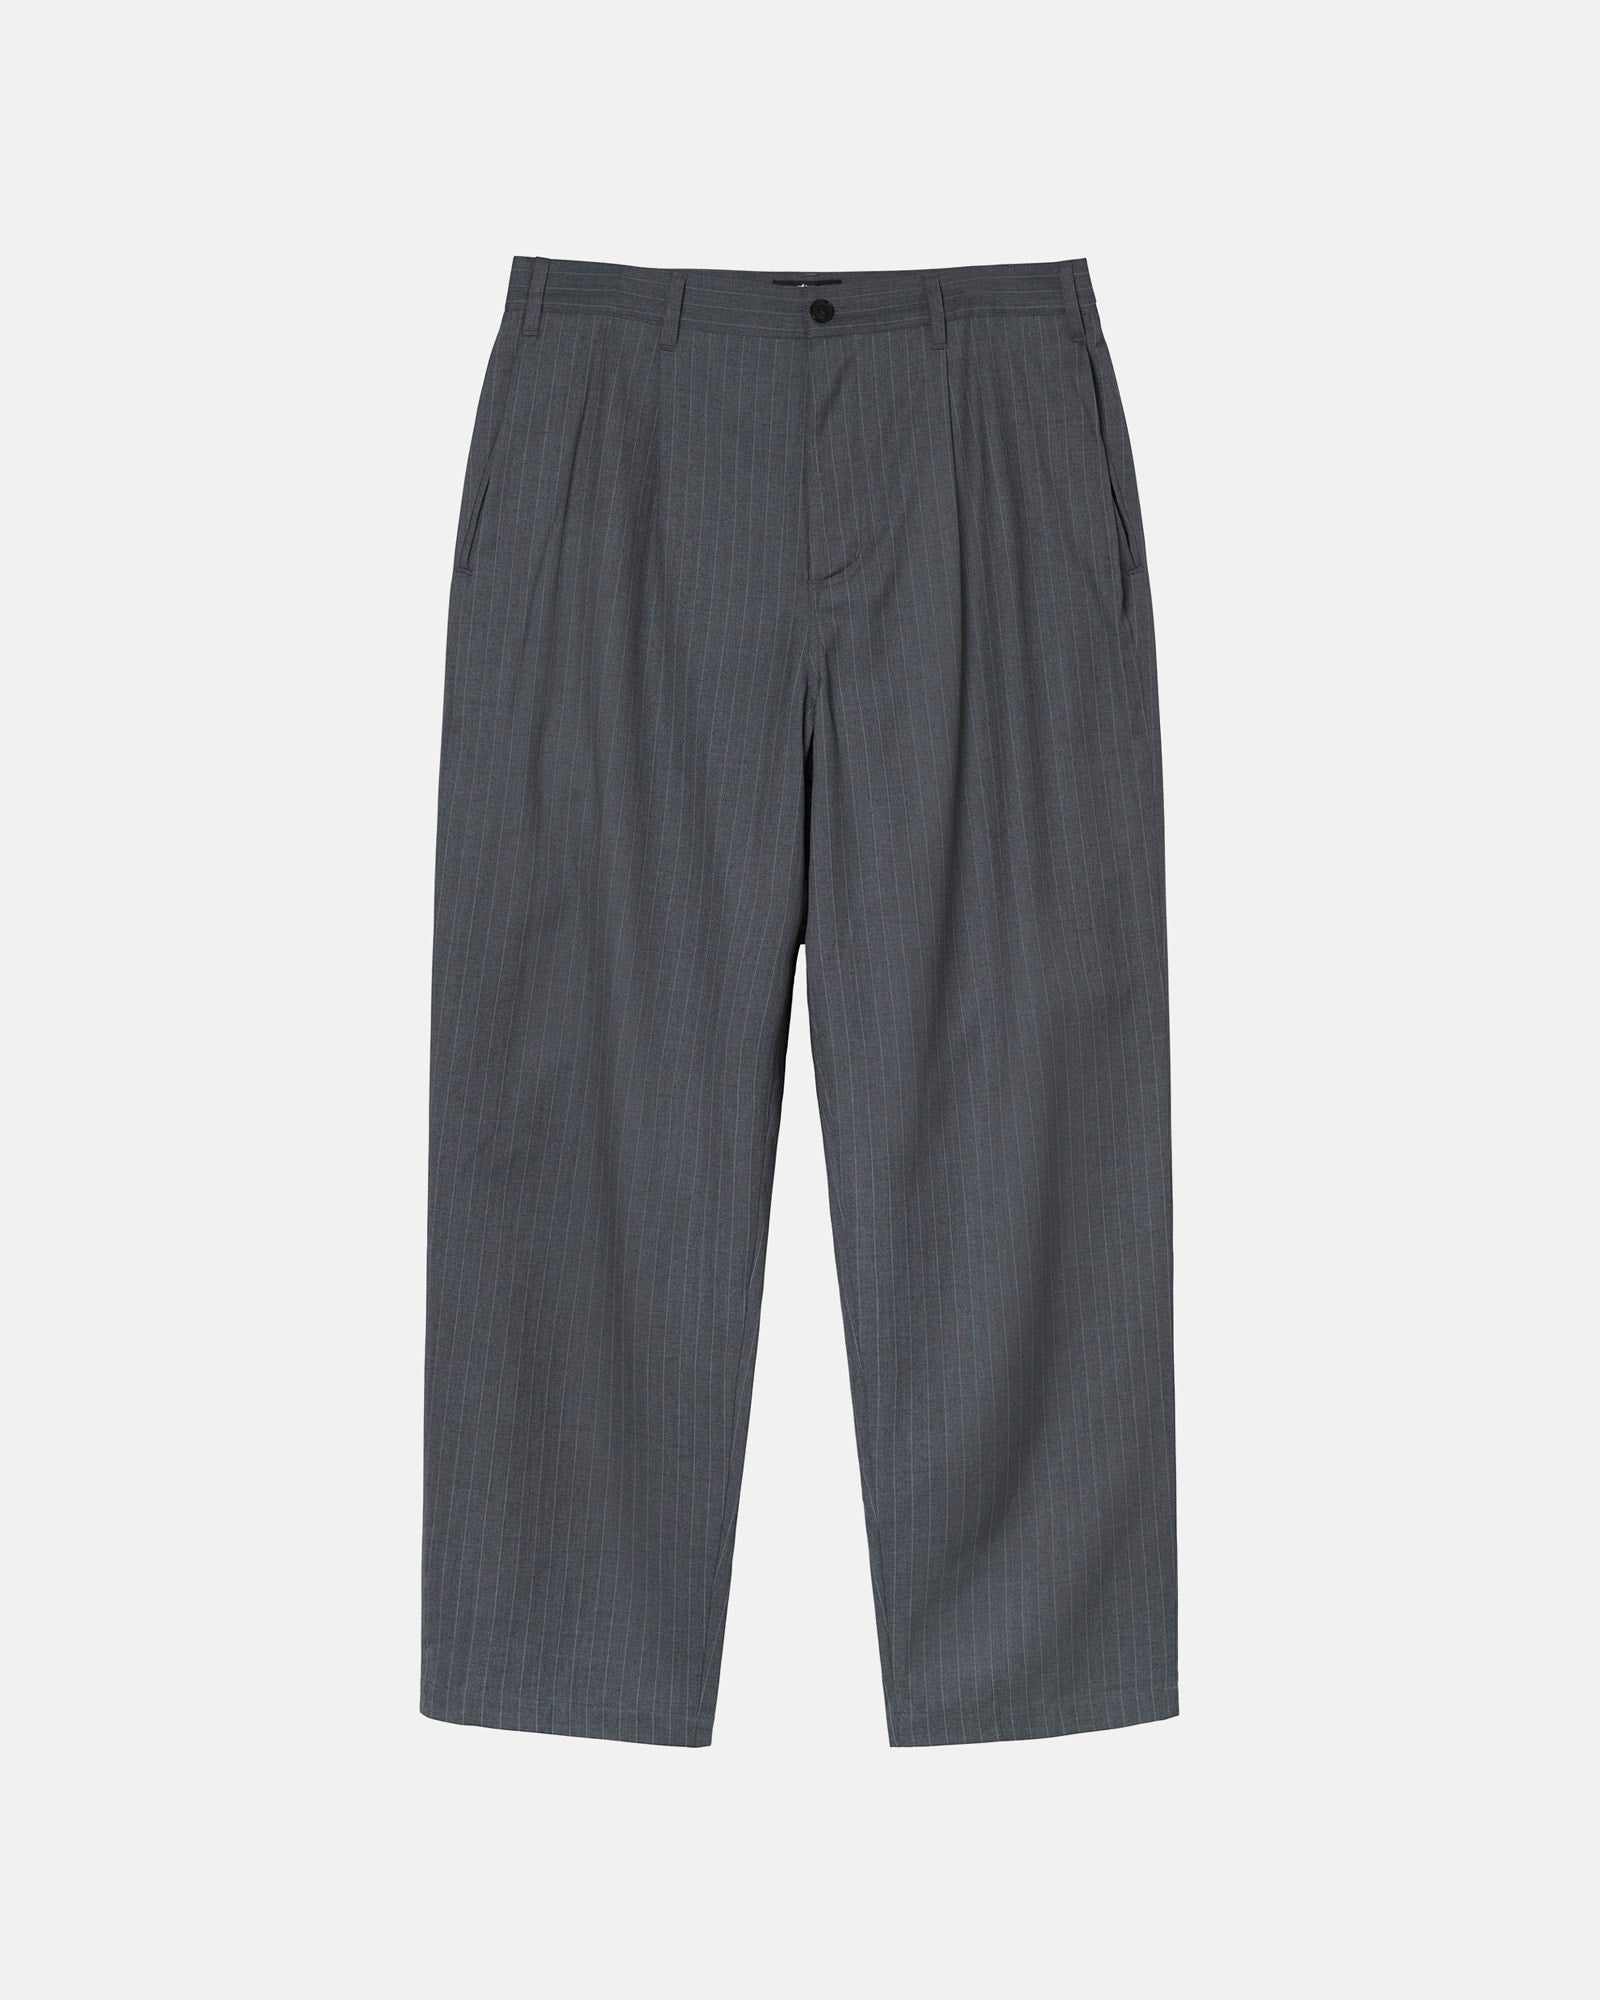 STUSSY STRIPED VOLUME PLEATED TROUSER 30